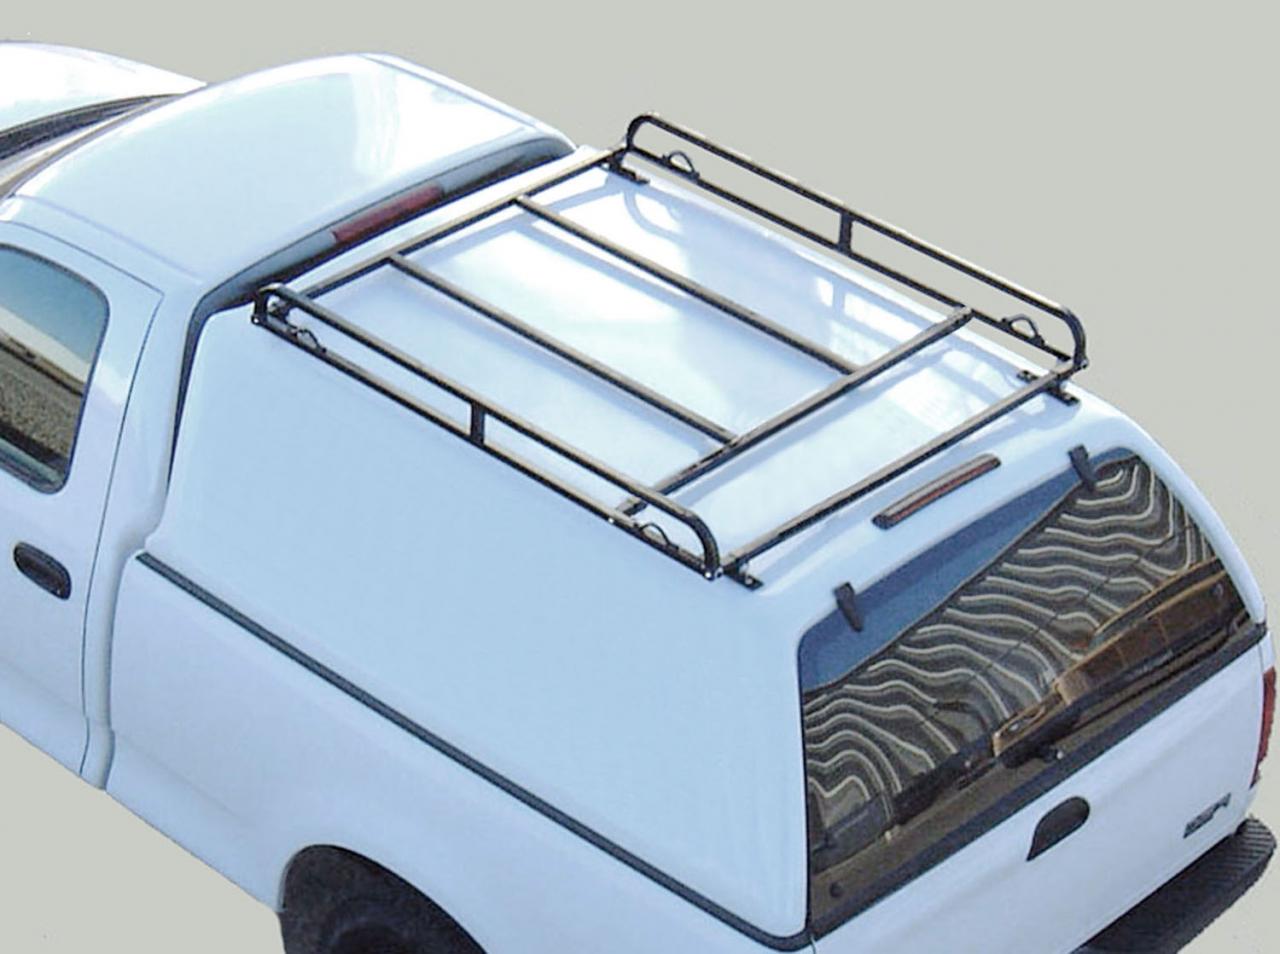 Short Bed Canopy Truck Rack on Topper